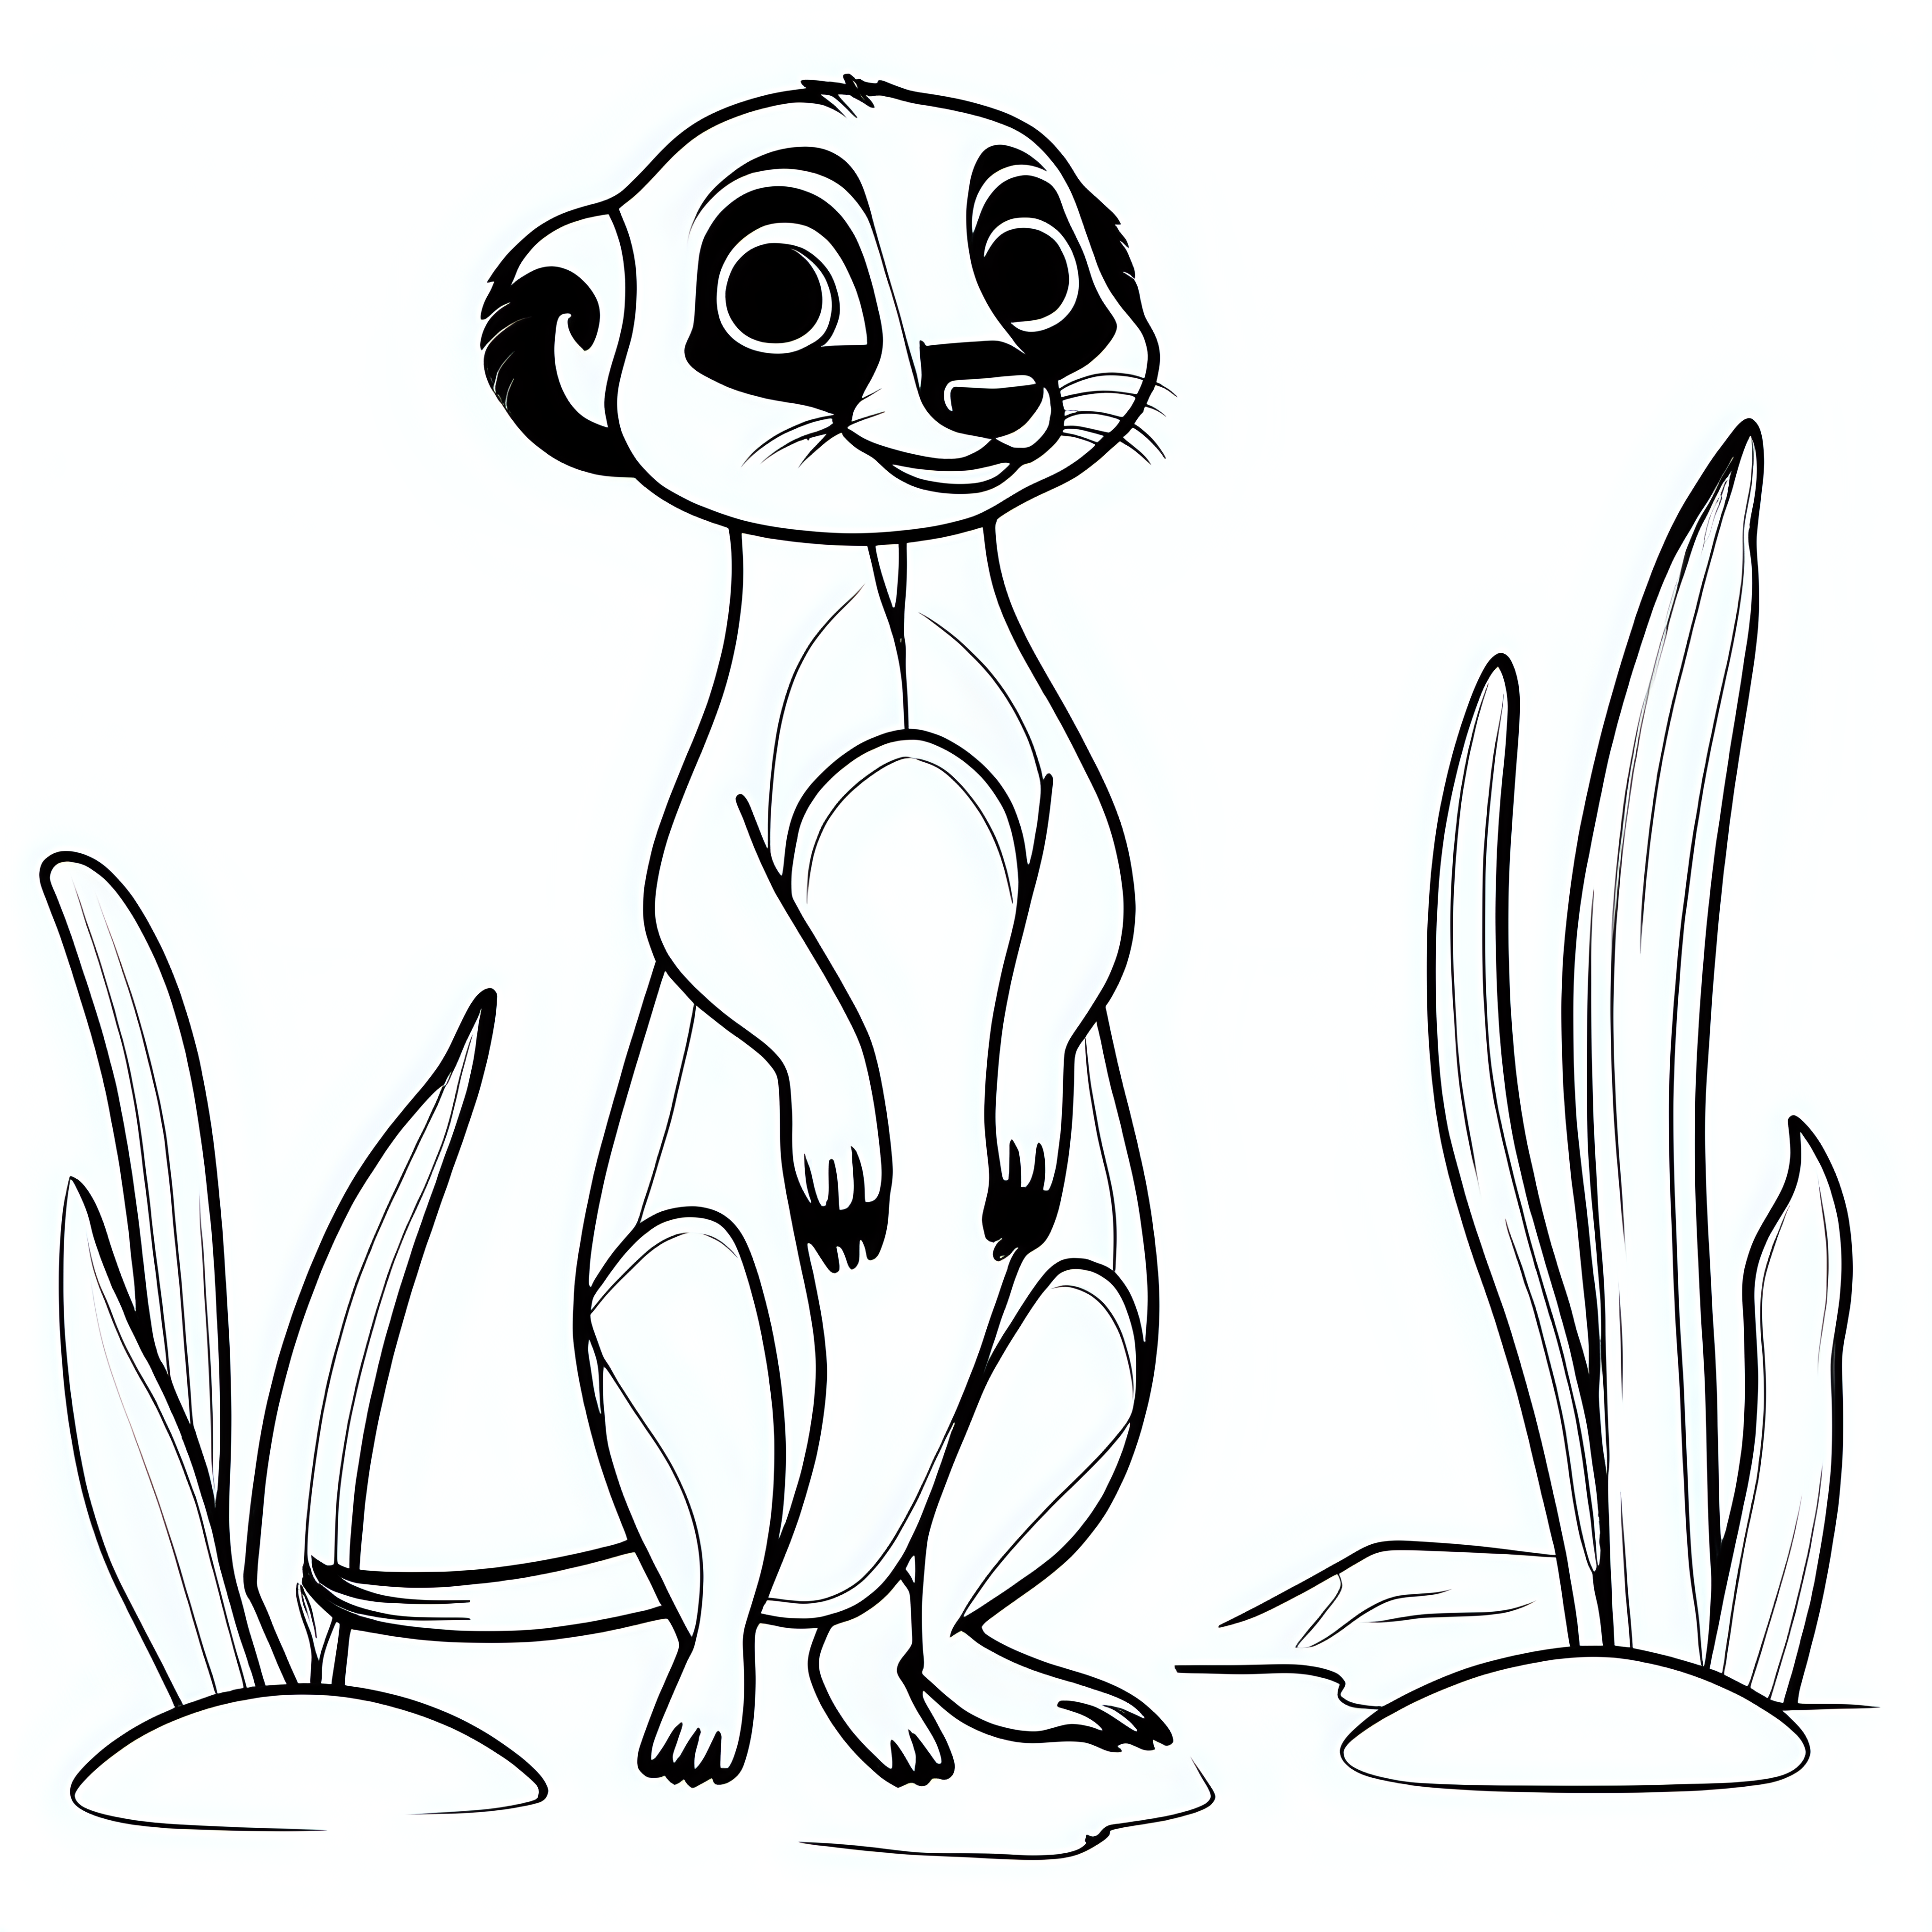 draw a cute Meerkat animal with only the outline in black for a coloring book for kids